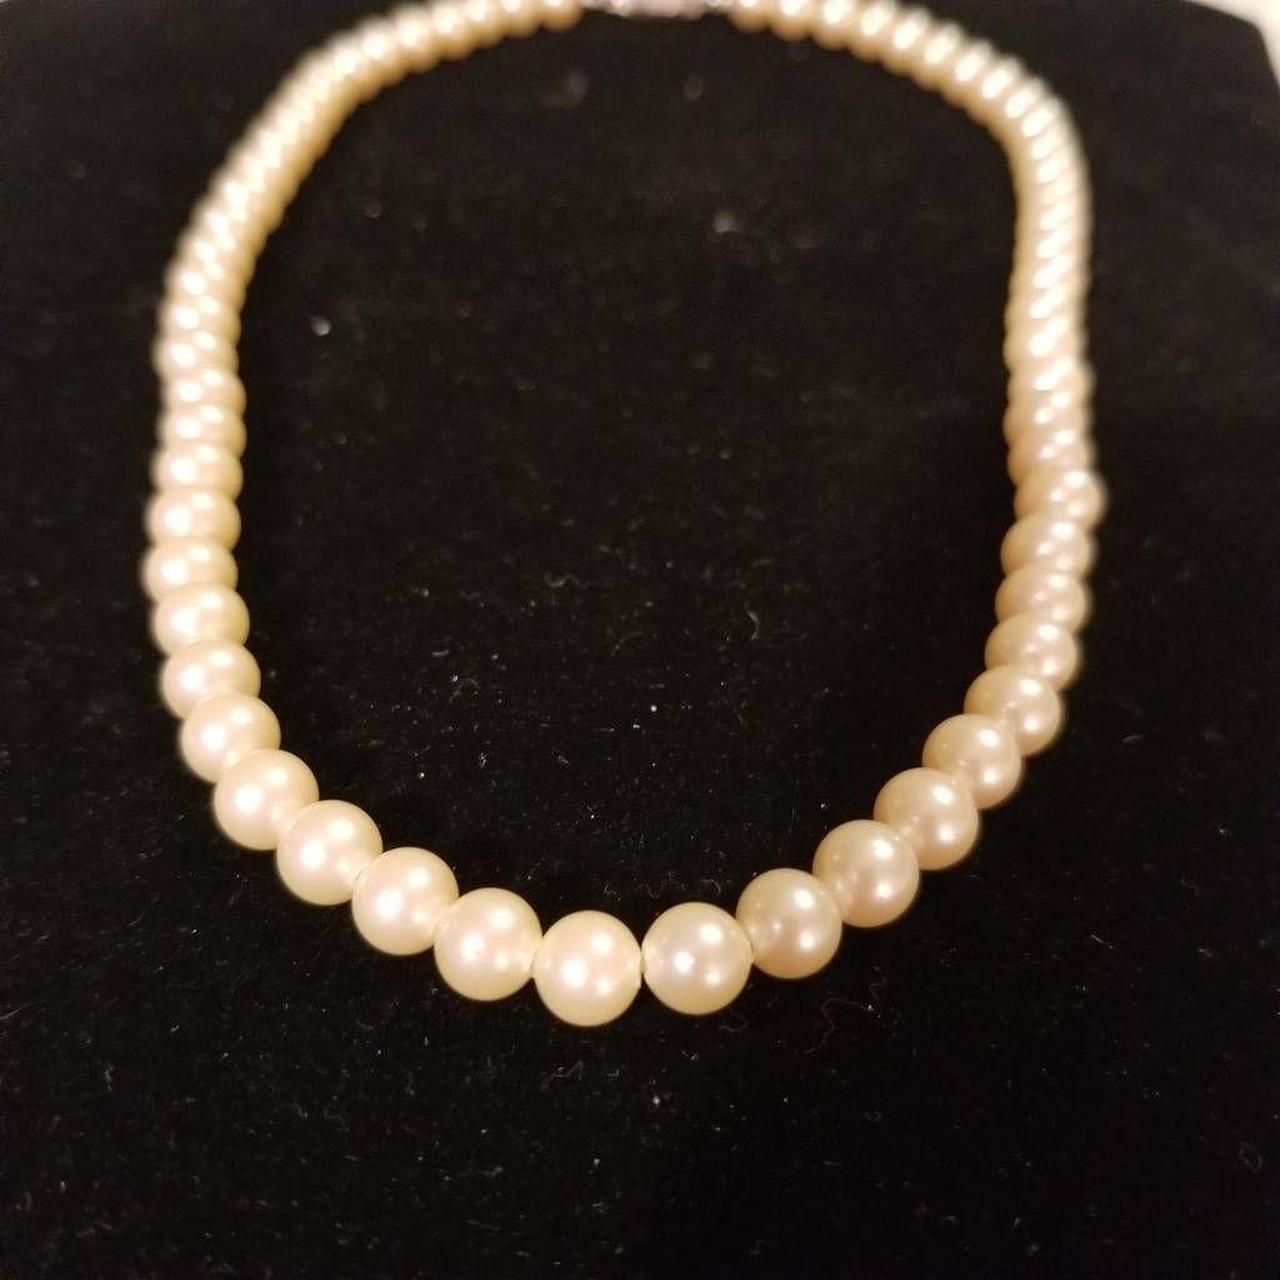 Vintage 1940s ROBERT Demario N.Y.C. Faux Pearl Choker Necklace Glass Pearls  Rhinestone Double Strand Fancy Clasp - Etsy